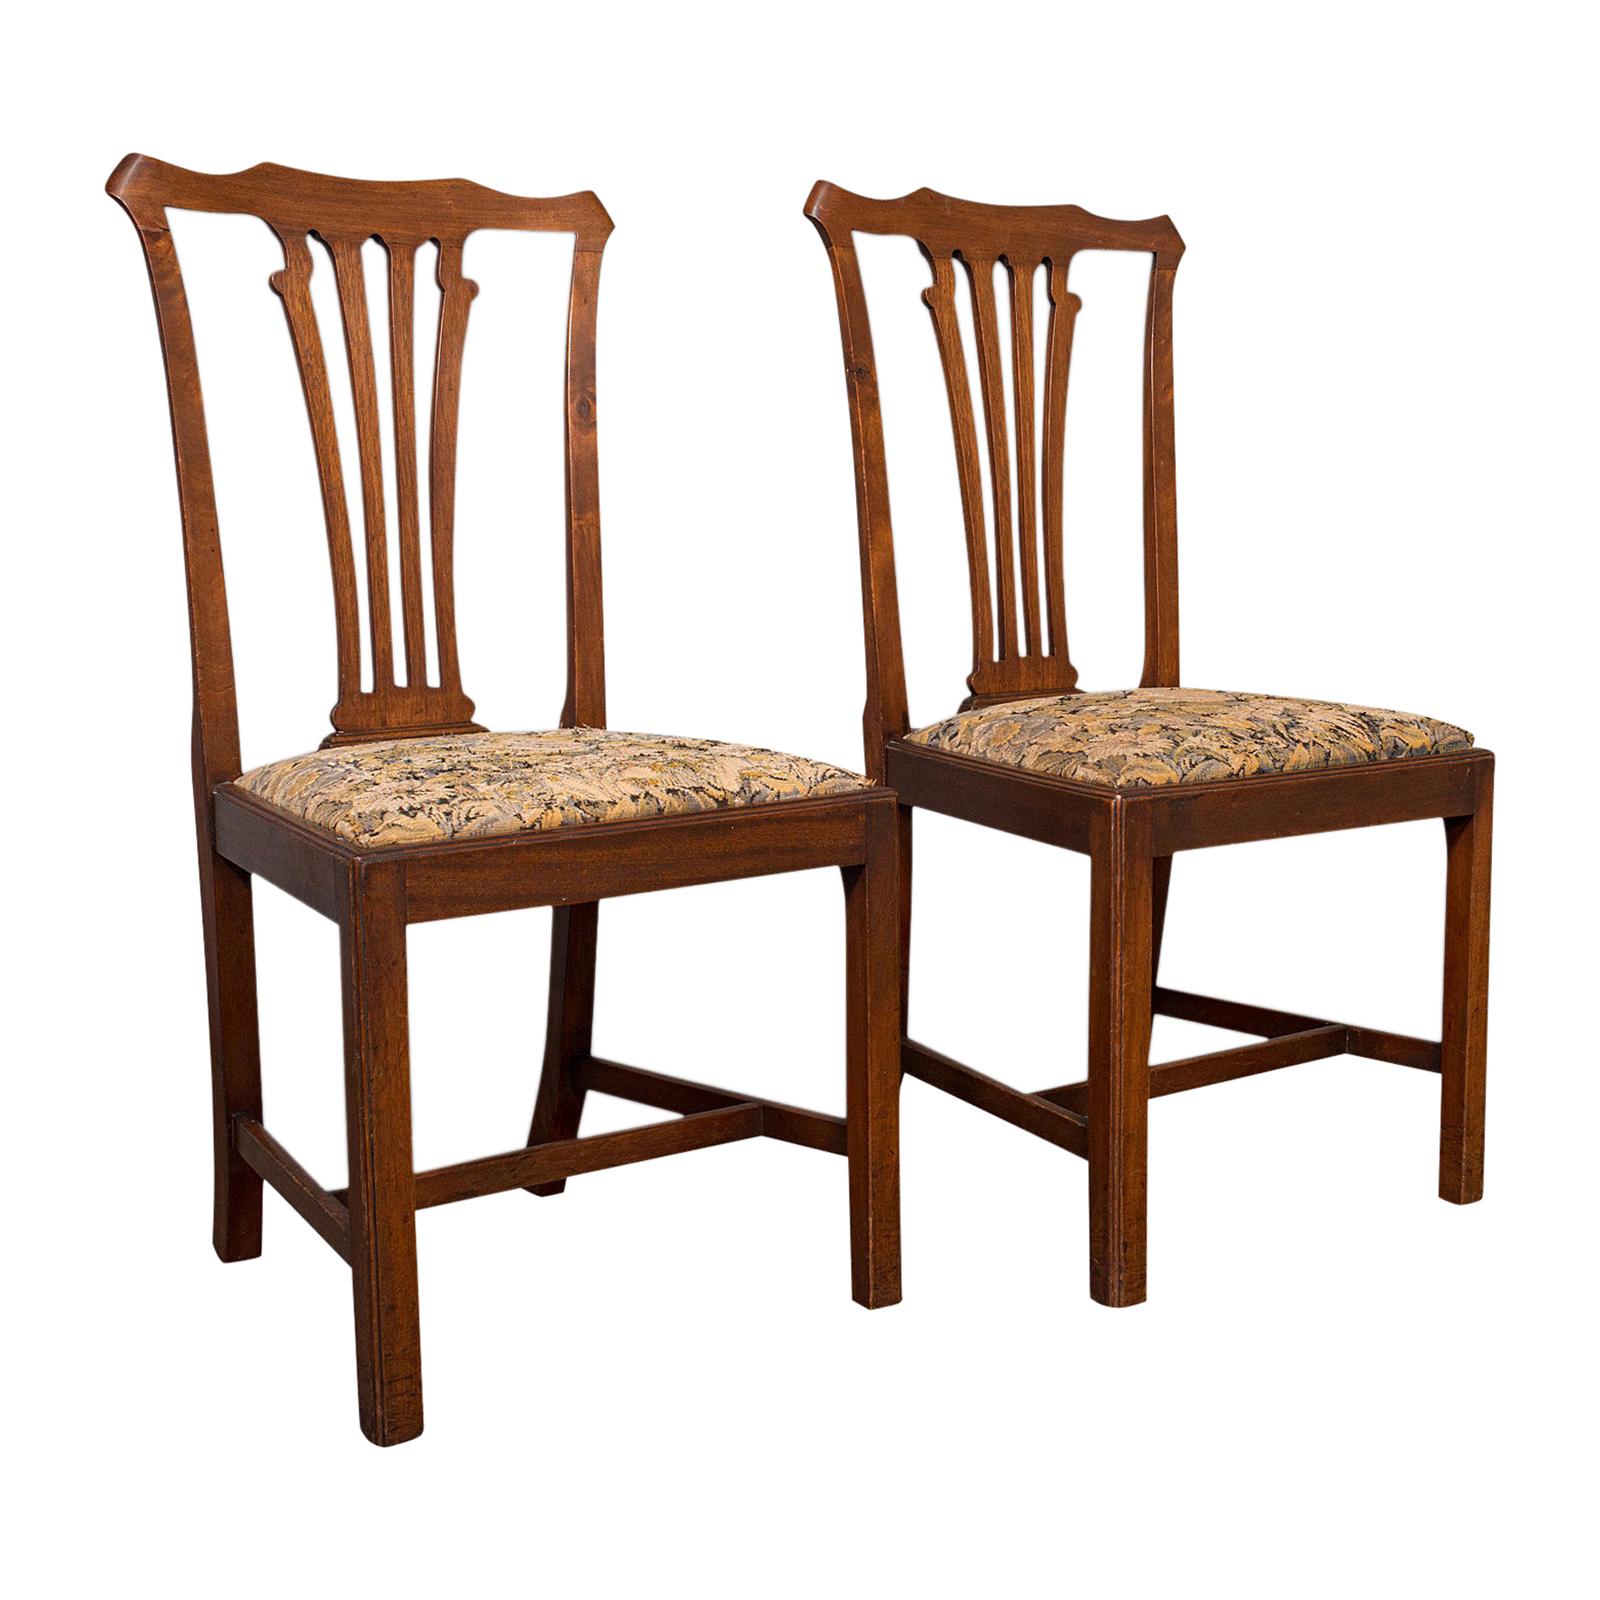 Pair of Antique Side Chairs, Mahogany, Hall, Dining Seat, Victorian, Circa 1900